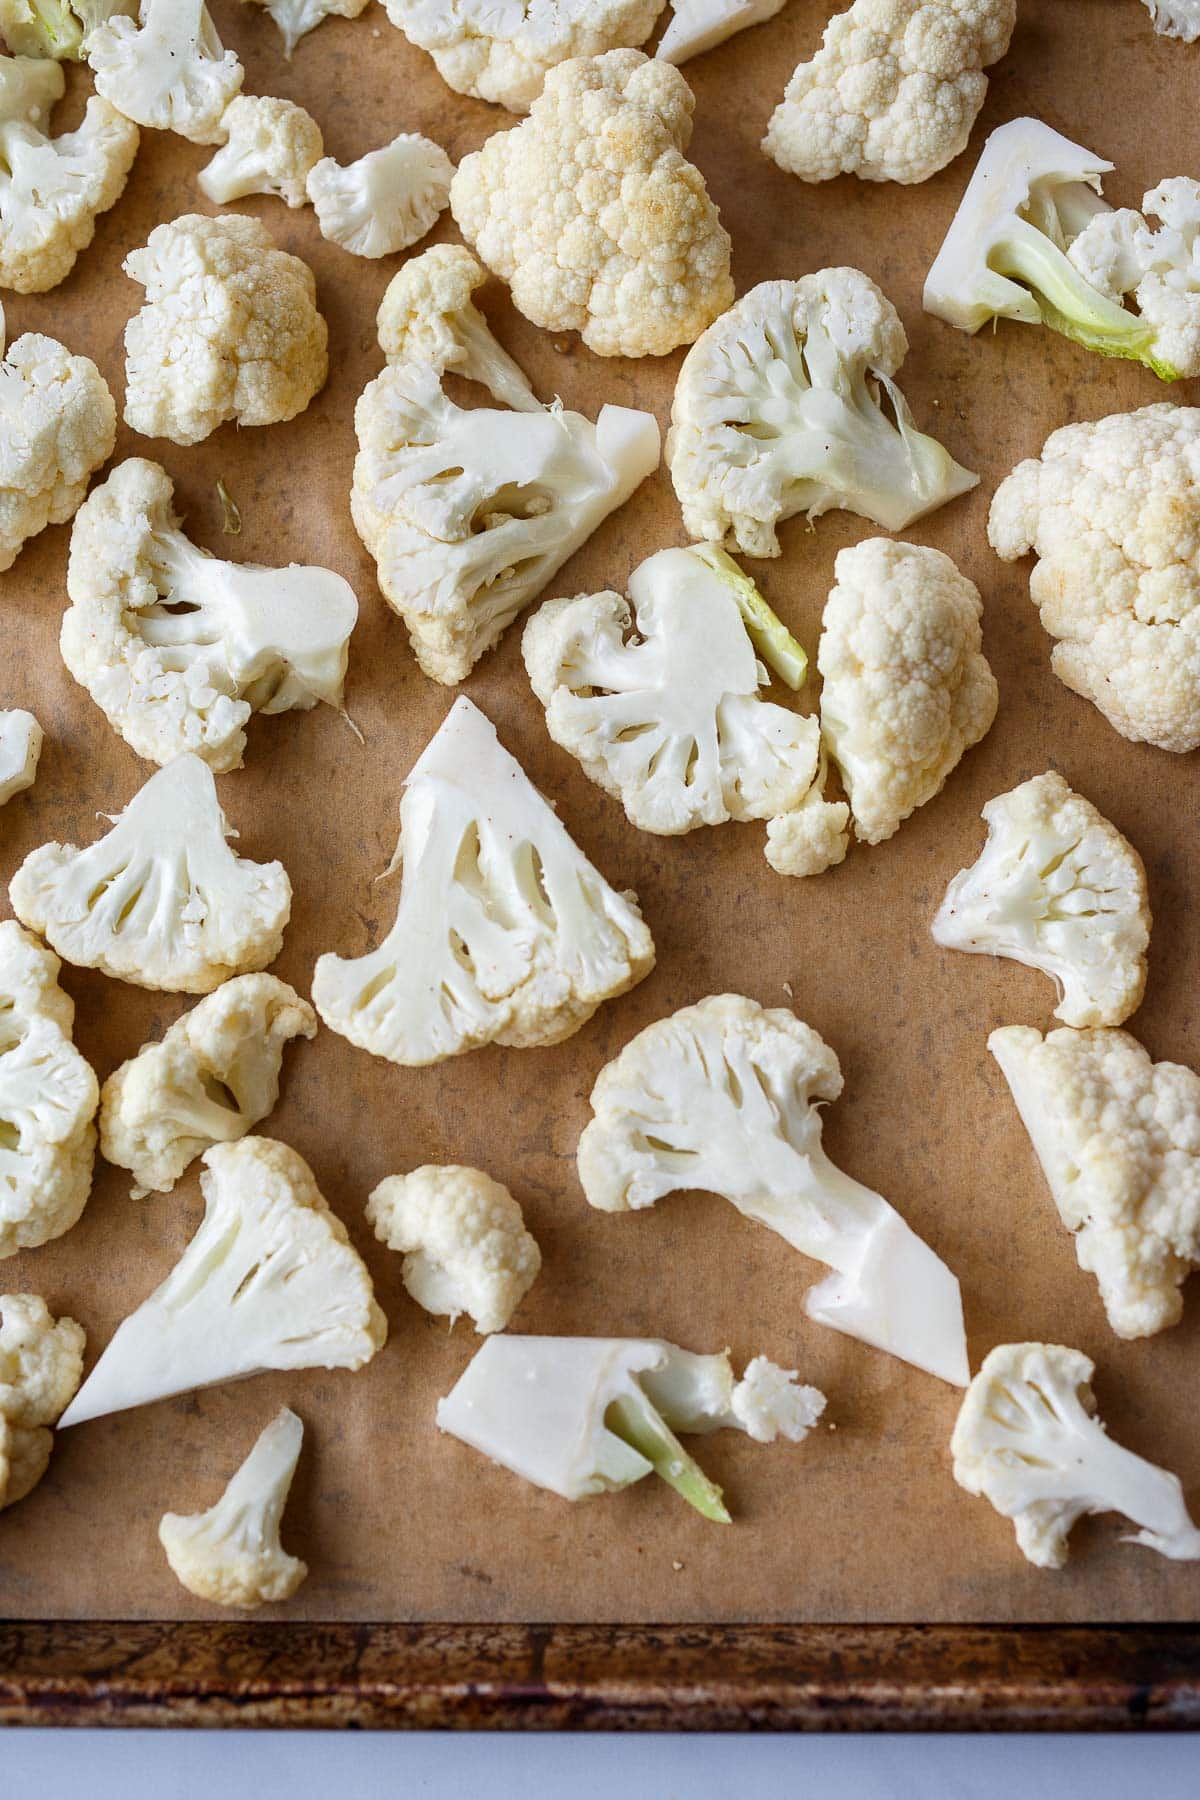 cauliflower florets spread out on parchment-lined baking sheet.